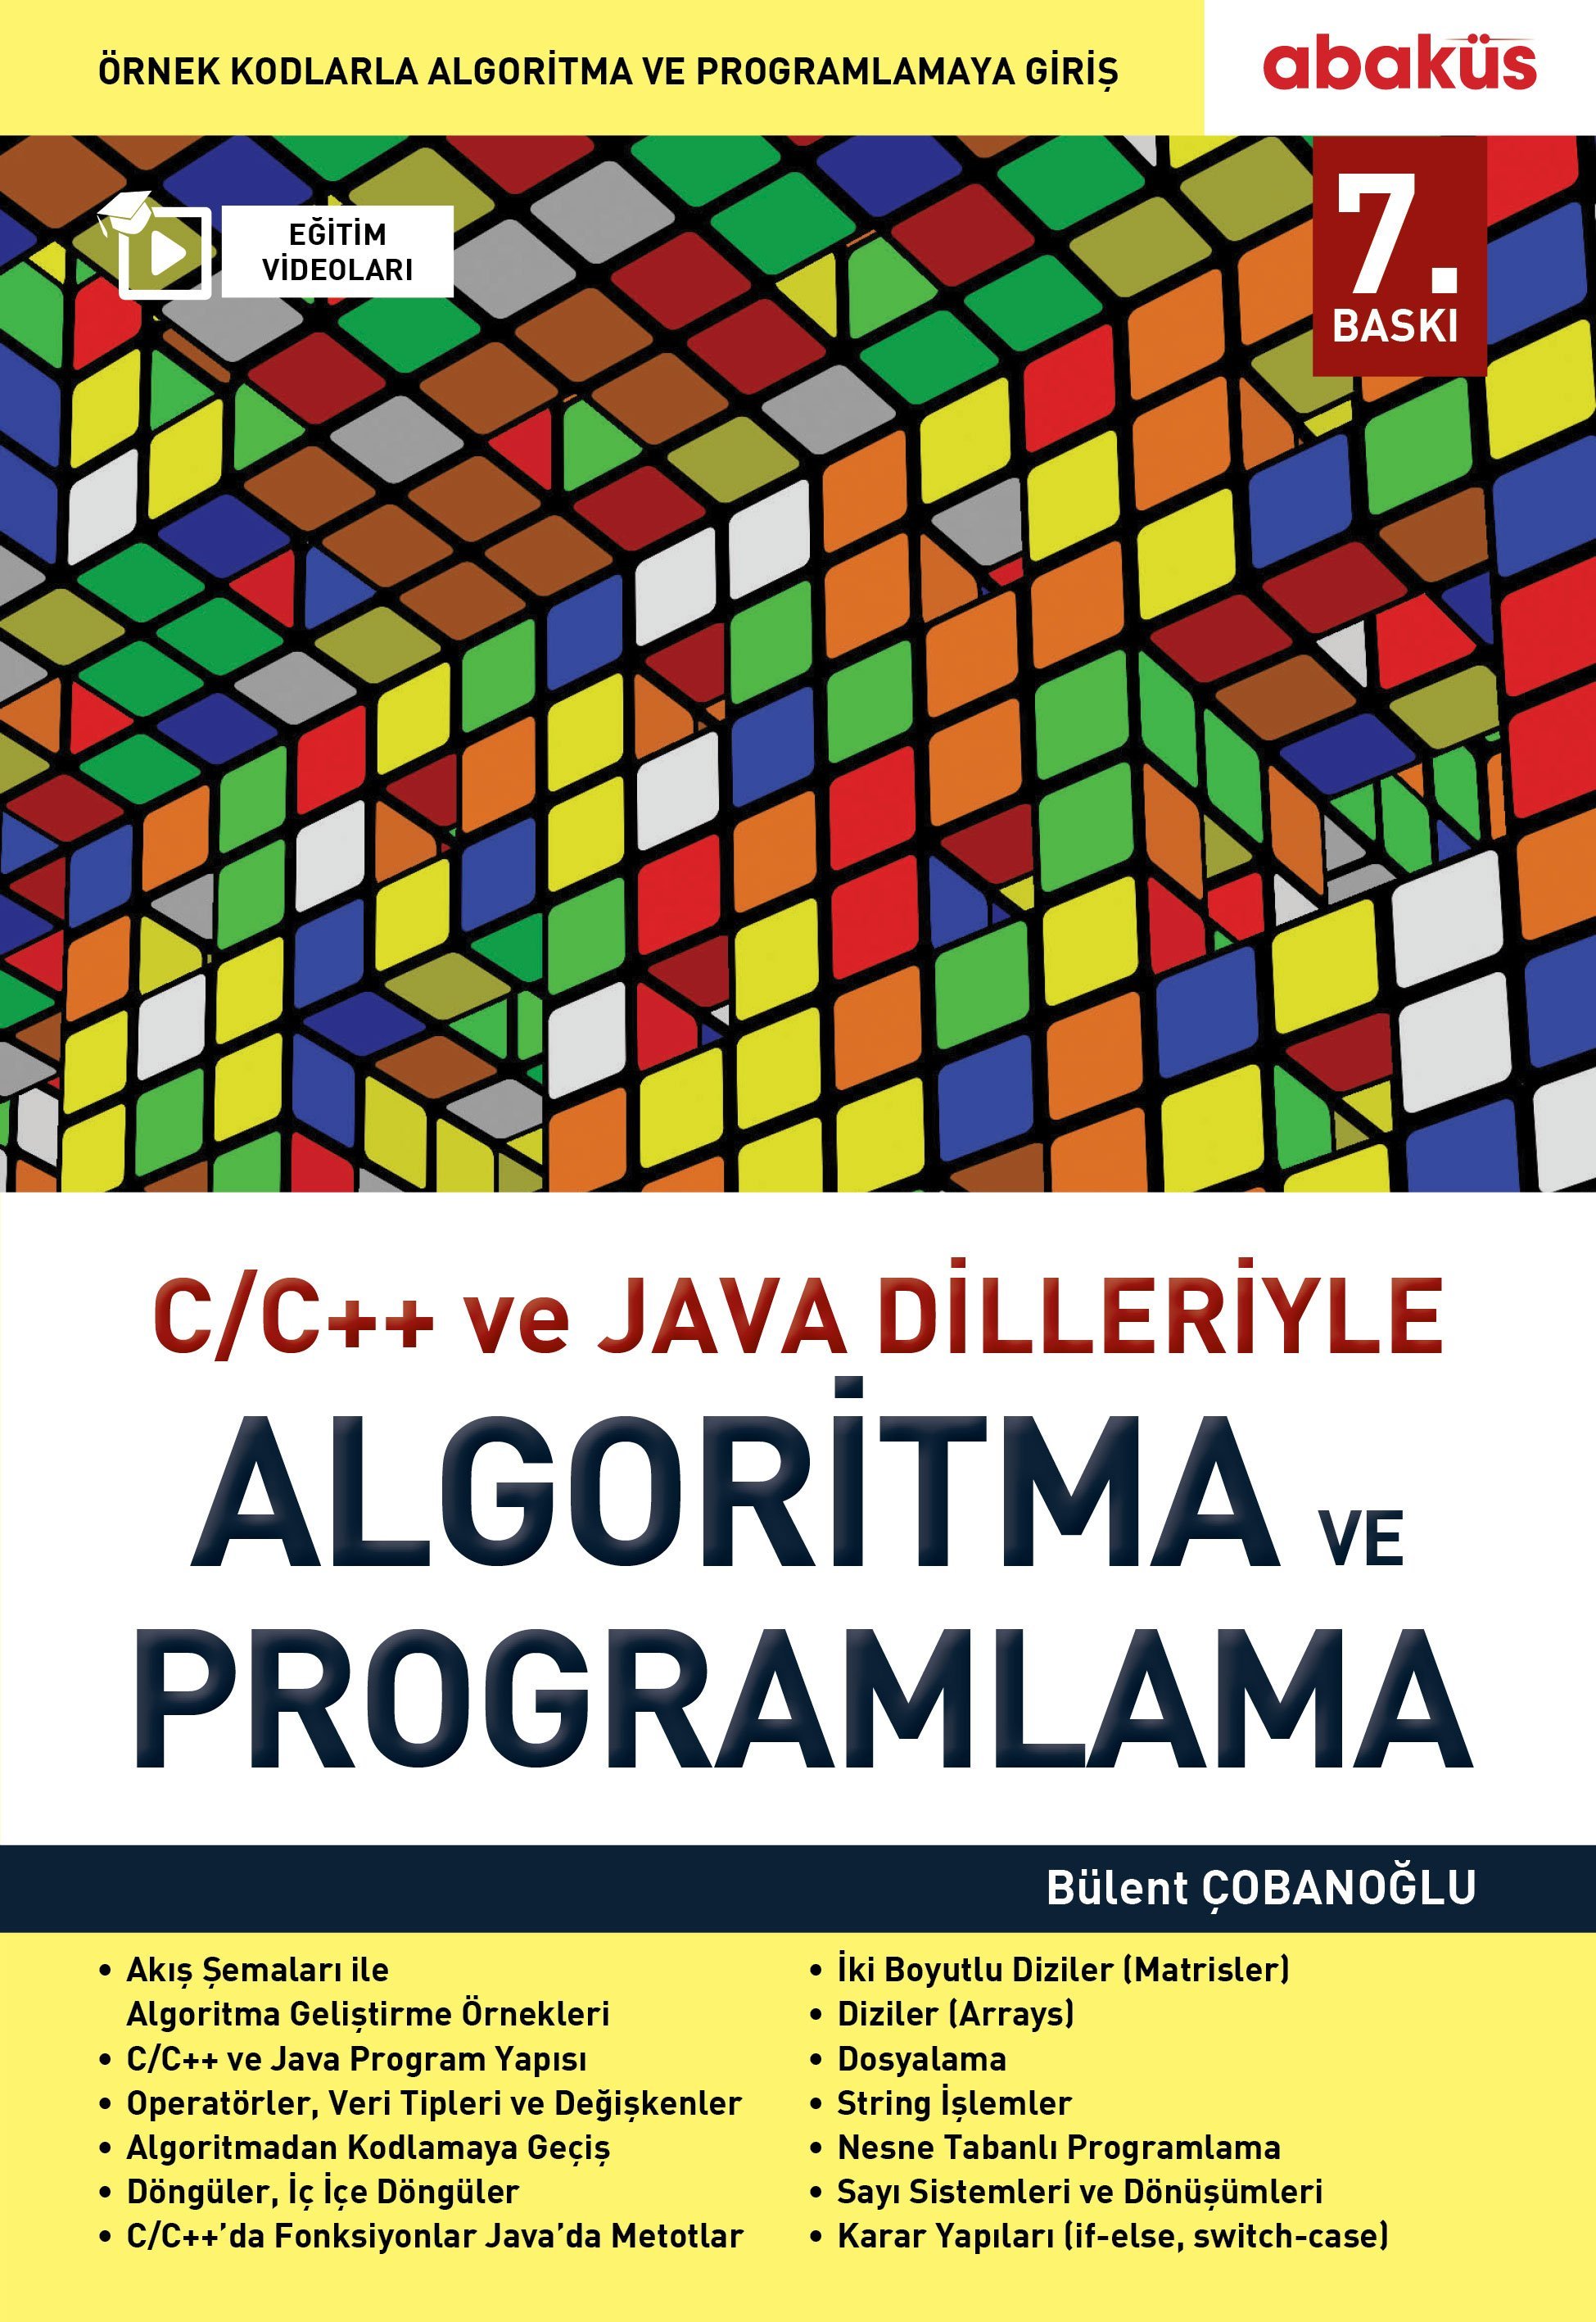 Algorithm and Programming with C C++ and Java Languages (Training Video)